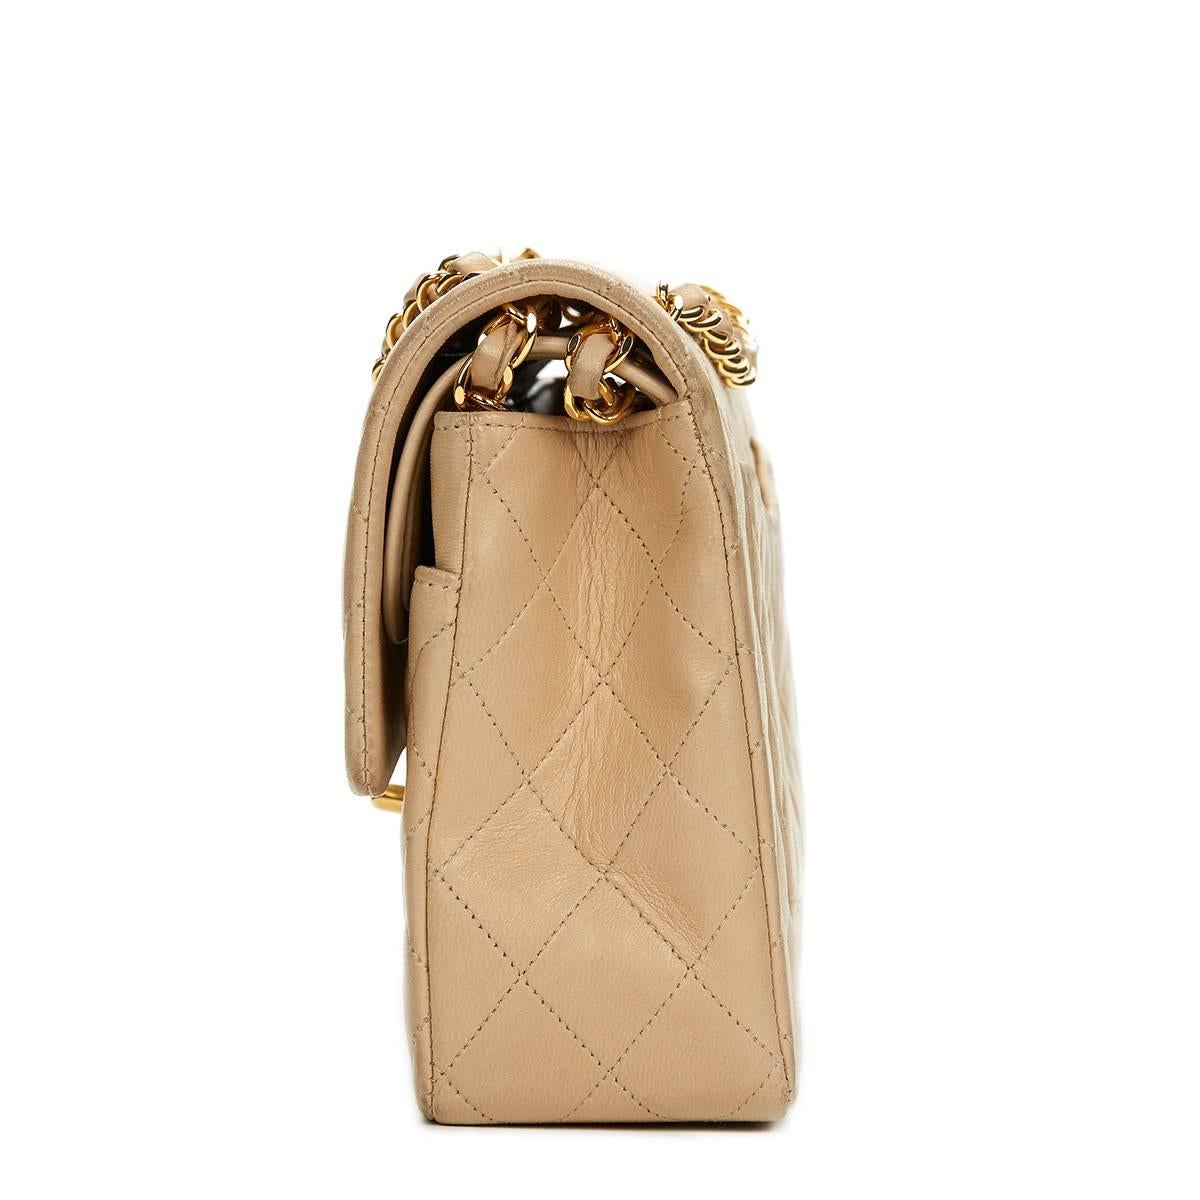 CHANEL
Beige Quilted Lambskin Vintage Medium Classic Double Flap Bag

This CHANEL Medium Classic Double Flap Bag is in Very Good Pre-Owned Condition accompanied by Chanel Dust Bag, Box, Authenticity Card. Circa 1994. Primarily made from Lambskin